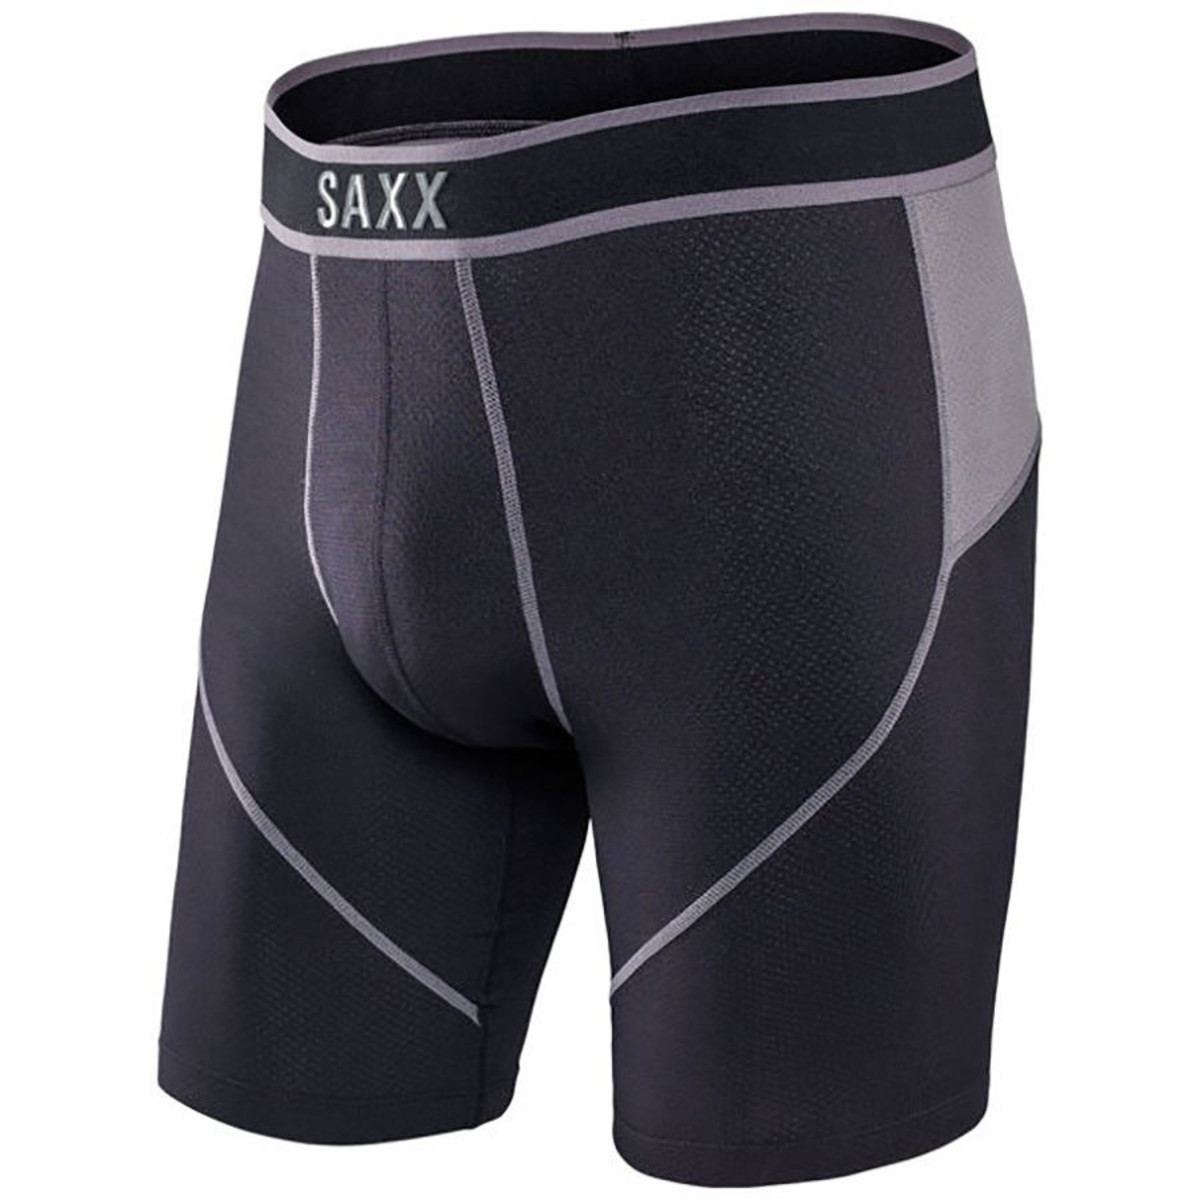 Socks and Underwear You’ll Actually Want to Receive as Gifts - Men's ...